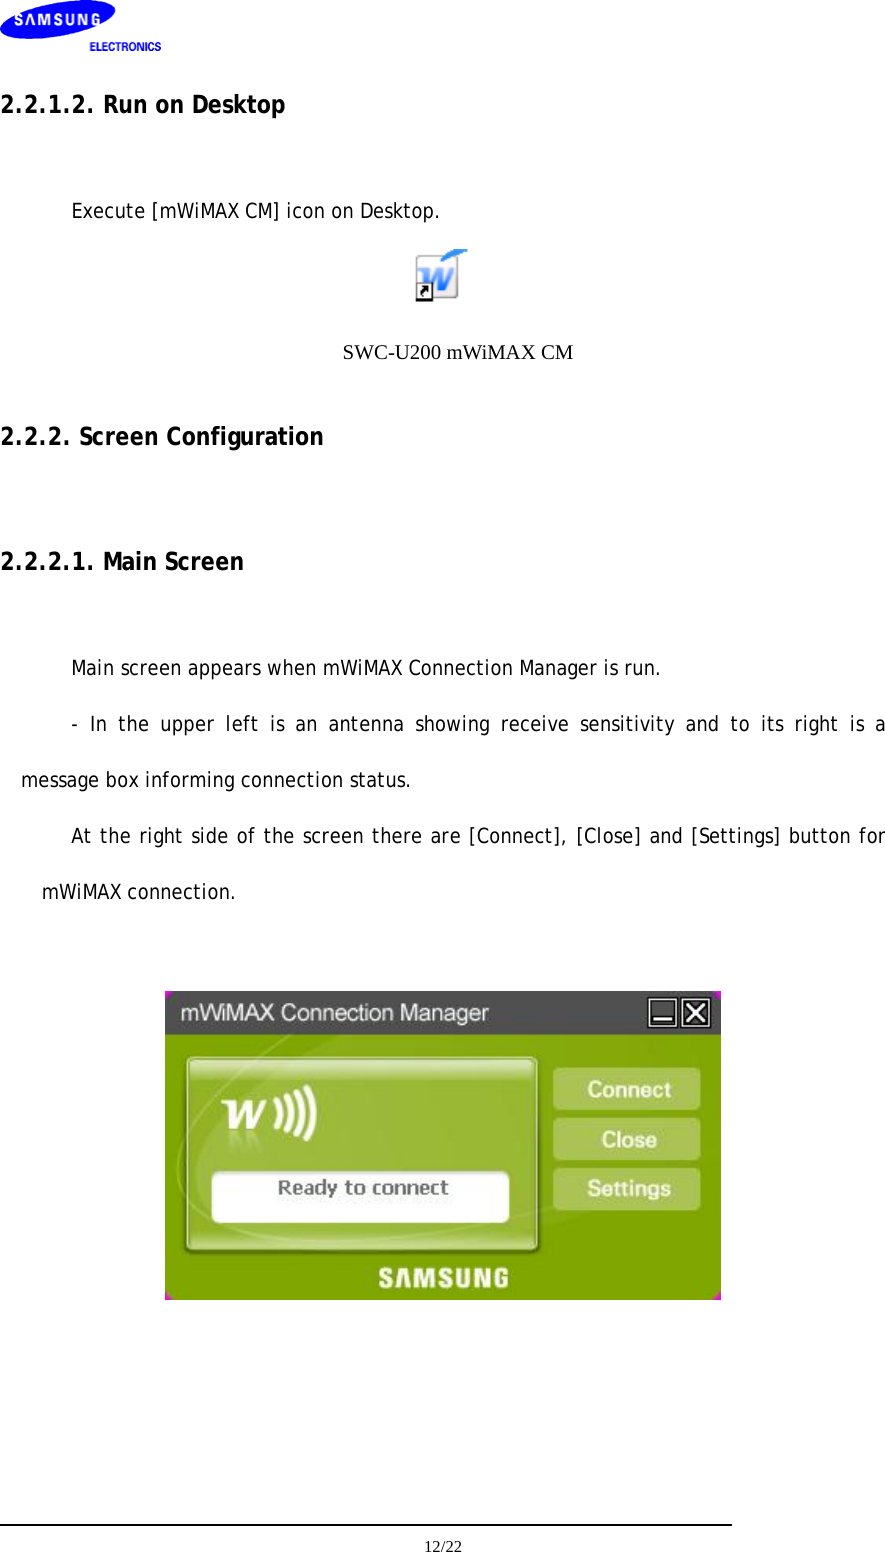     12/22  2.2.1.2. Run on Desktop  Execute [mWiMAX CM] icon on Desktop.  SWC-U200 mWiMAX CM 2.2.2. Screen Configuration  2.2.2.1. Main Screen  Main screen appears when mWiMAX Connection Manager is run. - In the upper left is an antenna showing receive sensitivity and to its right is a message box informing connection status.  At the right side of the screen there are [Connect], [Close] and [Settings] button for mWiMAX connection.     